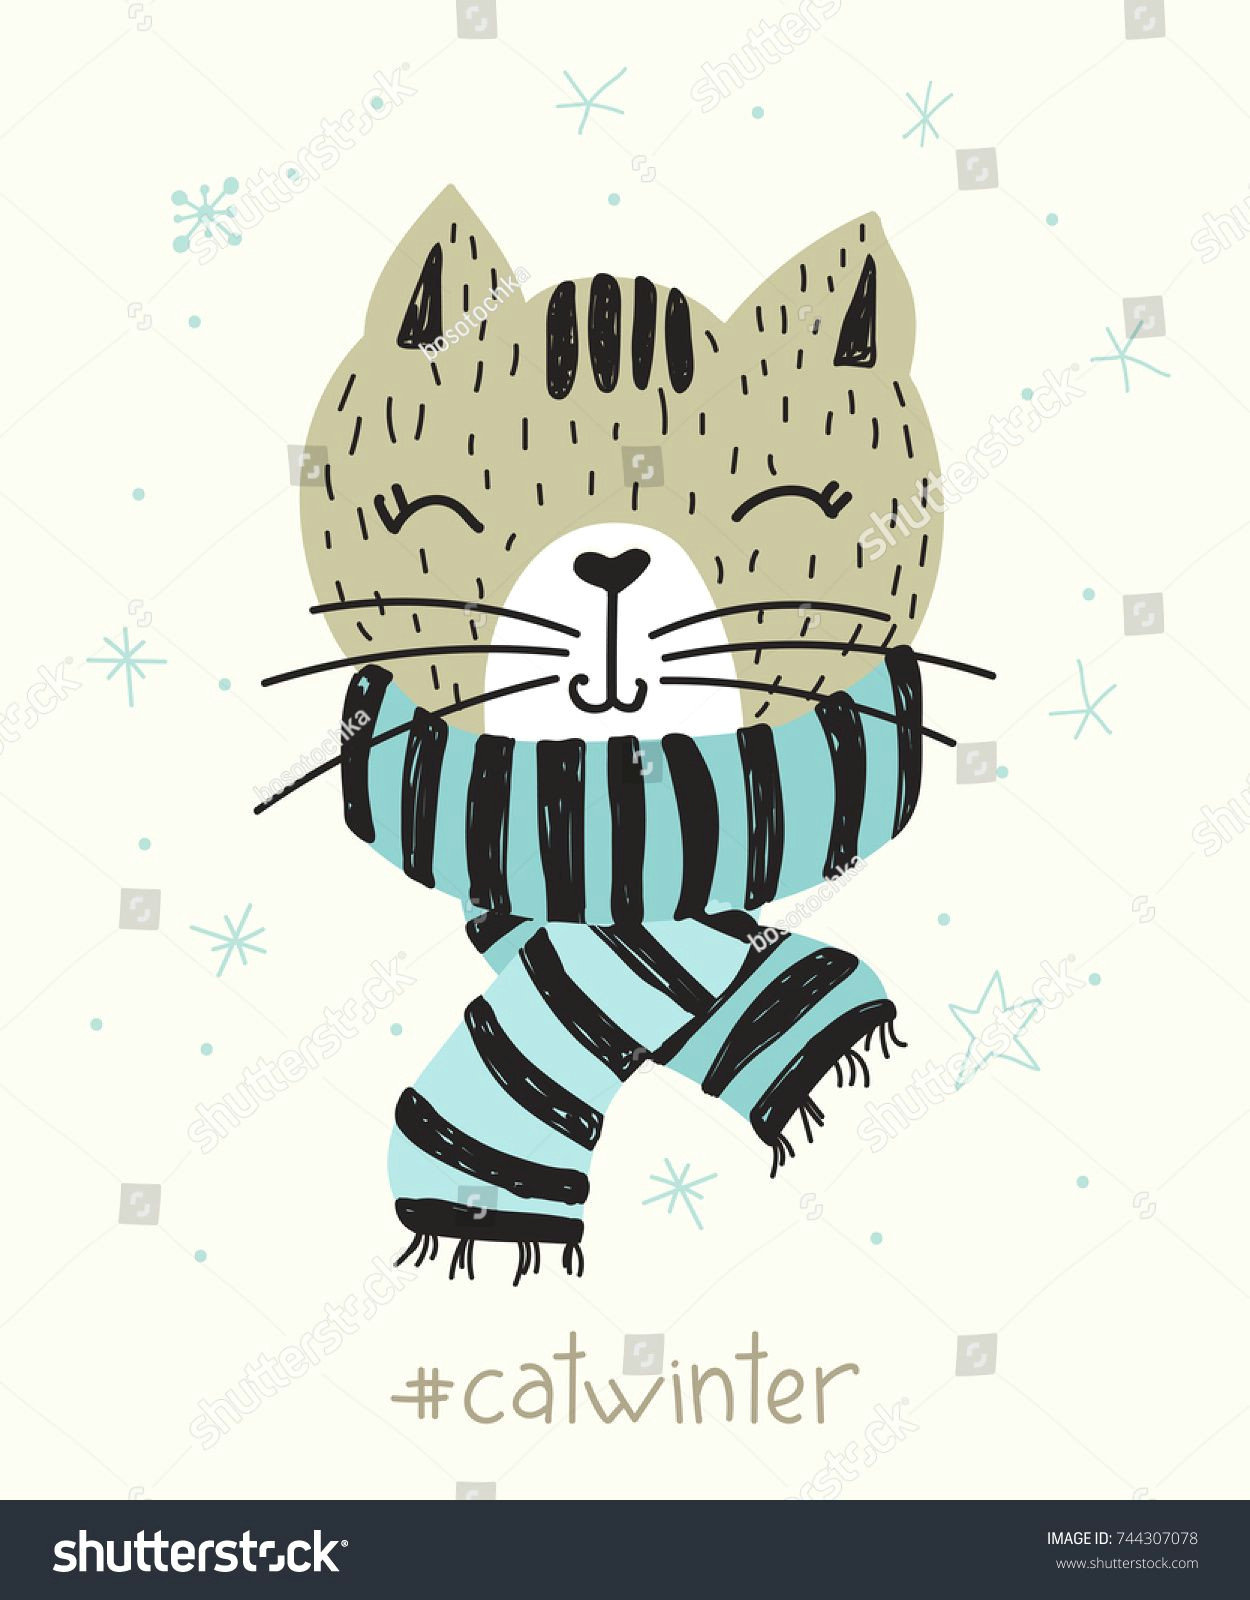 Hand Drawing Of A Cat Vector Poster with Hand Drawn Funny Cat Vector Illustration for